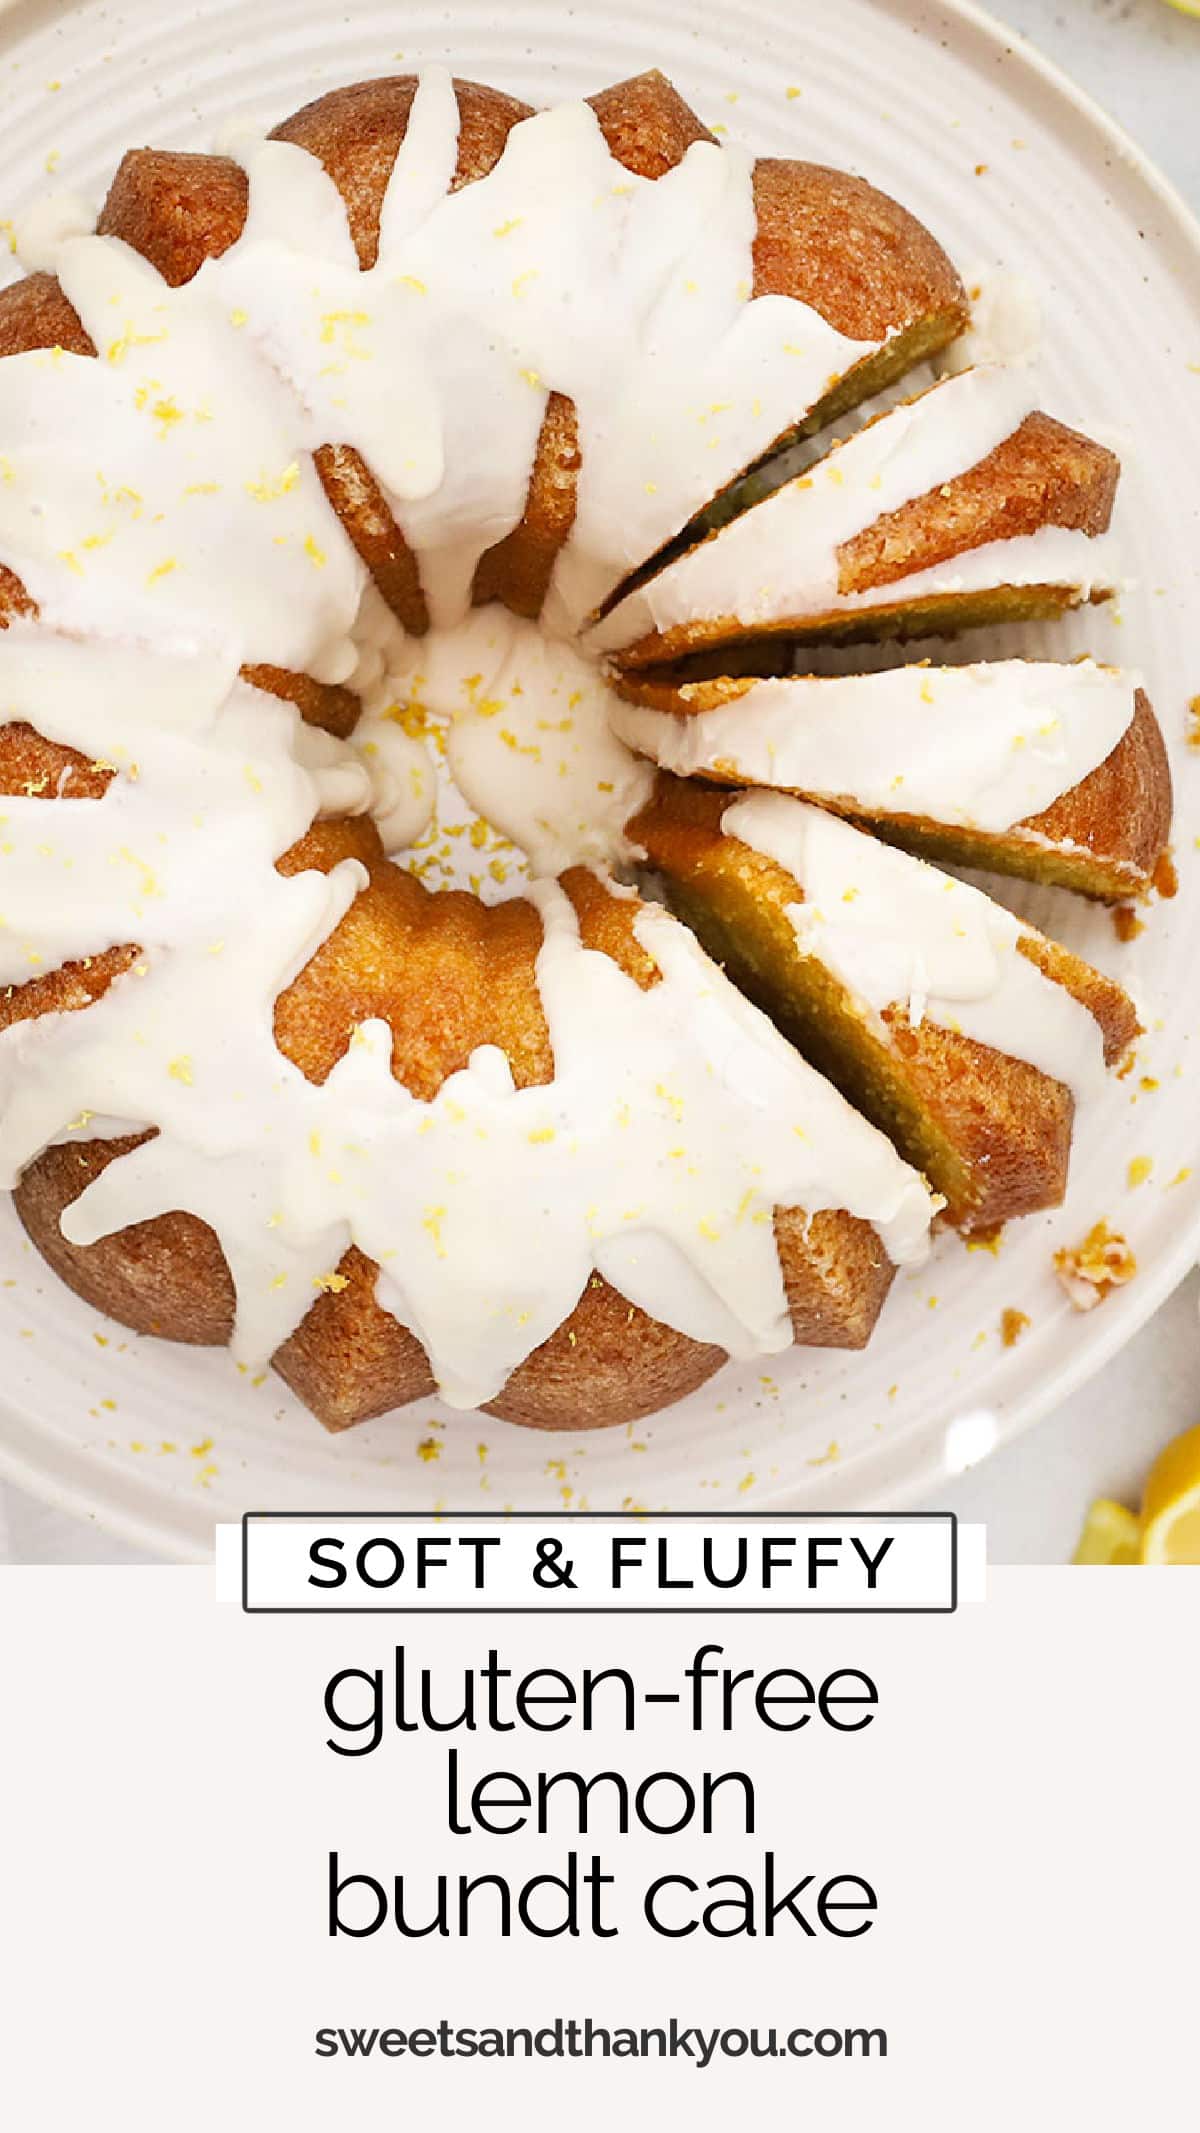 This gluten-free lemon bundt cake recipe is bursting with fresh lemon flavor and a soft, fluffy texture you're going to LOVE. / gluten free lemon cake recipe / gluten-free lemon pound cake / gluten free bundt cake recipe / gluten-free cake recipe / gluten-free lemon bundt recipe / lemon bundt cake without pudding mix / gluten-free lemon bundt cake from scratch